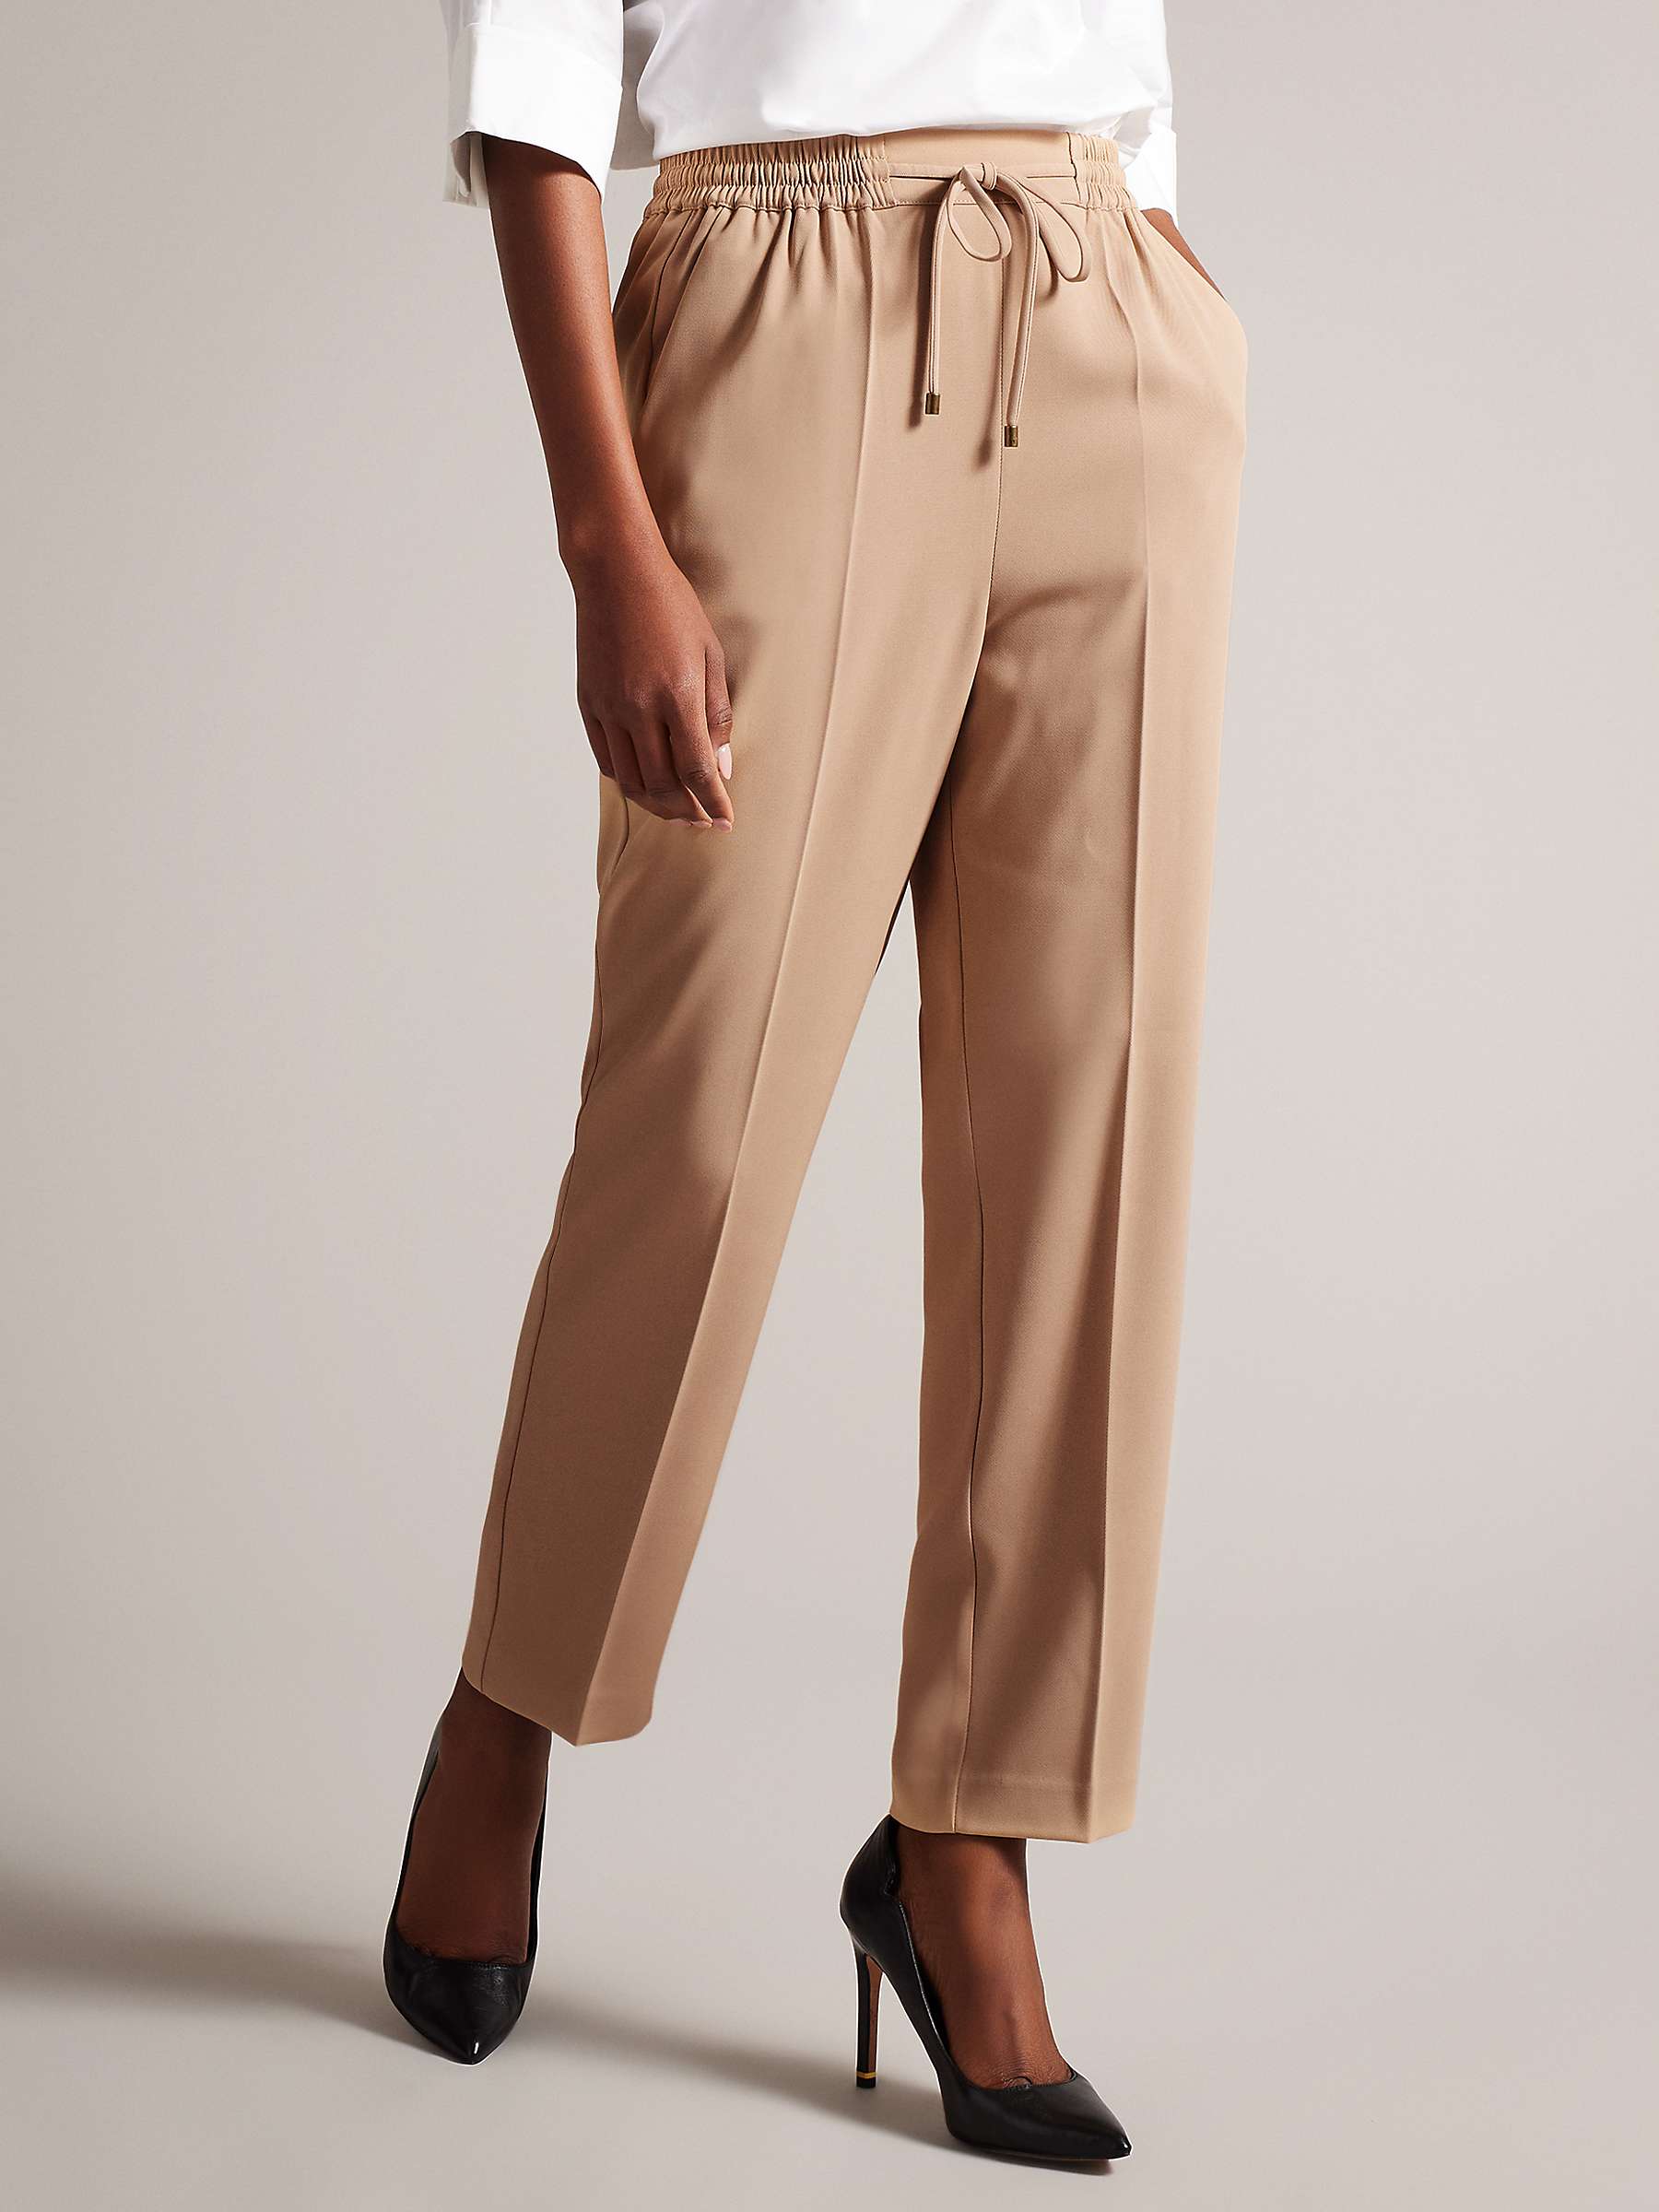 Buy Ted Baker Laurai Slim Cut Ankle Length Joggers, Brown Camel Online at johnlewis.com